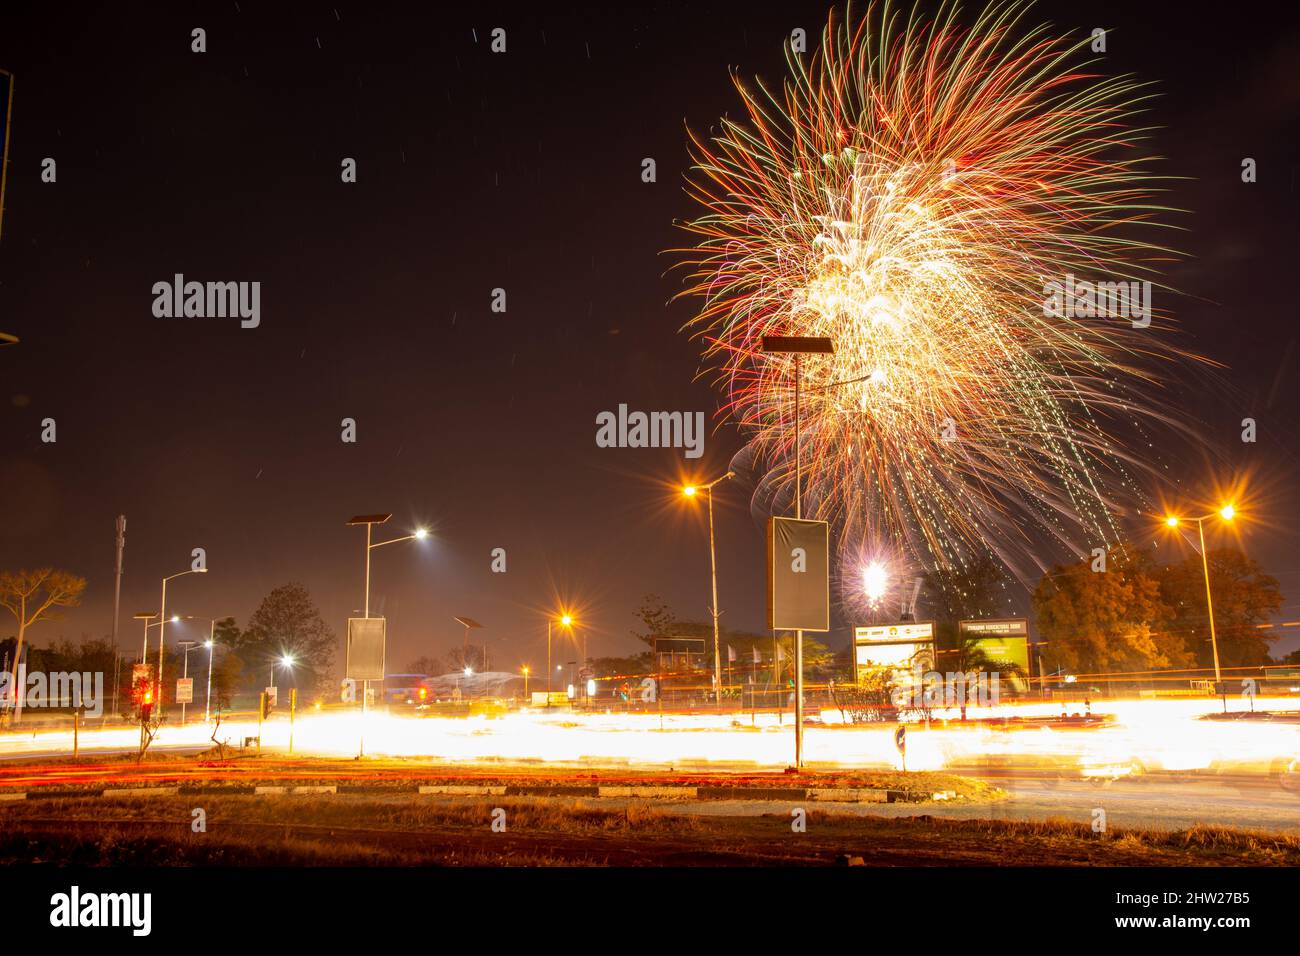 Beautiful colorful fireworks in Harare, Zimbabwe after the Harare Agricultural Show at night Stock Photo